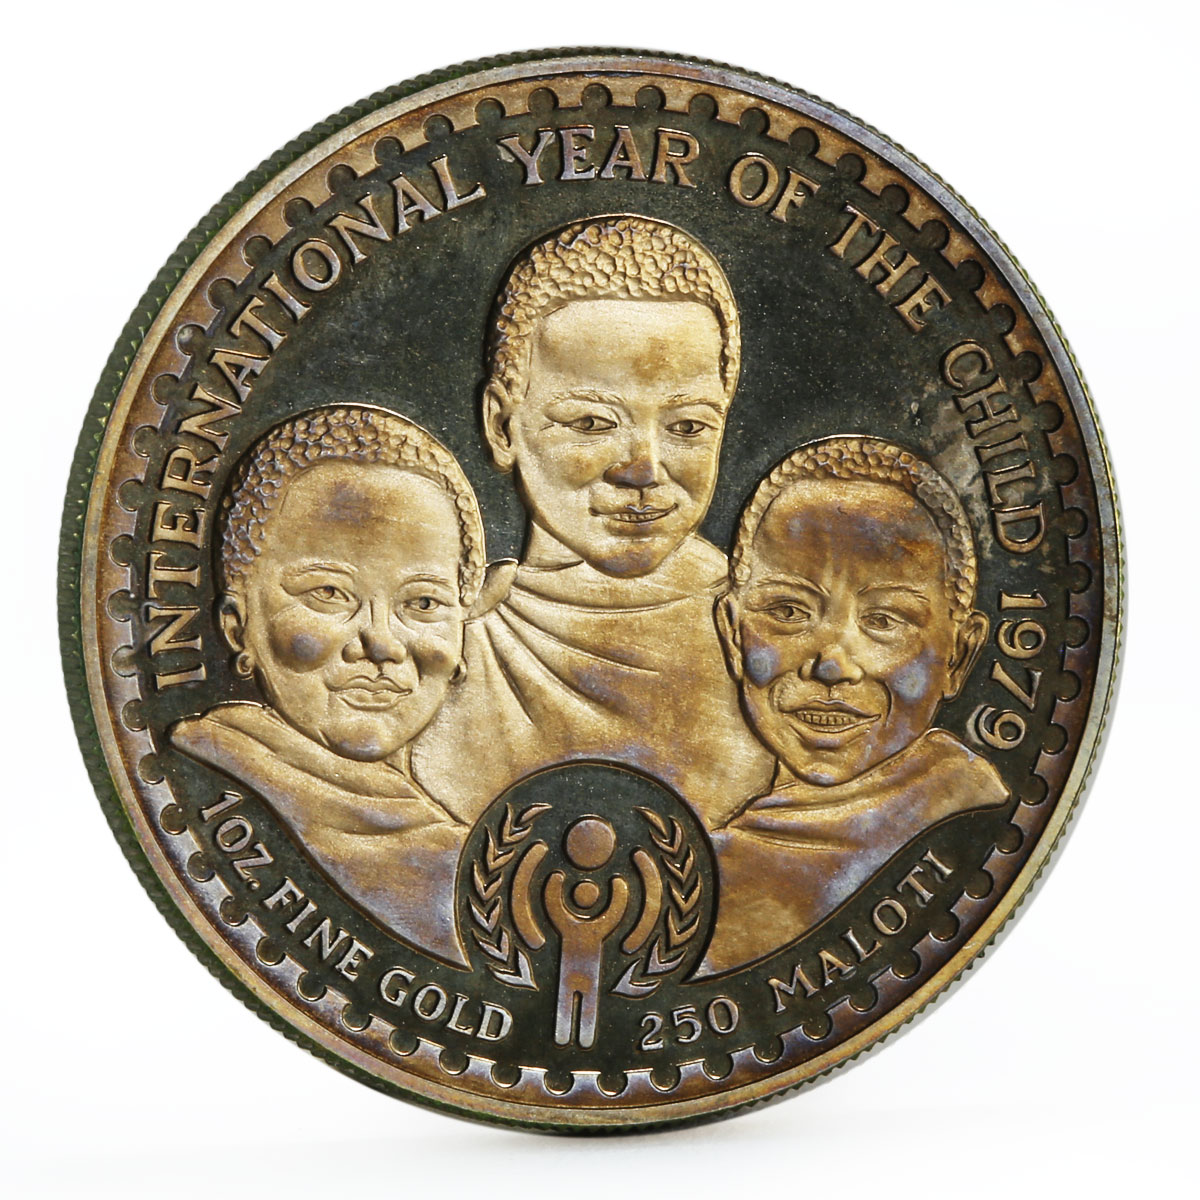 Lesotho 250 maloti Year of the Child PN12 trial essai brass coin 1979